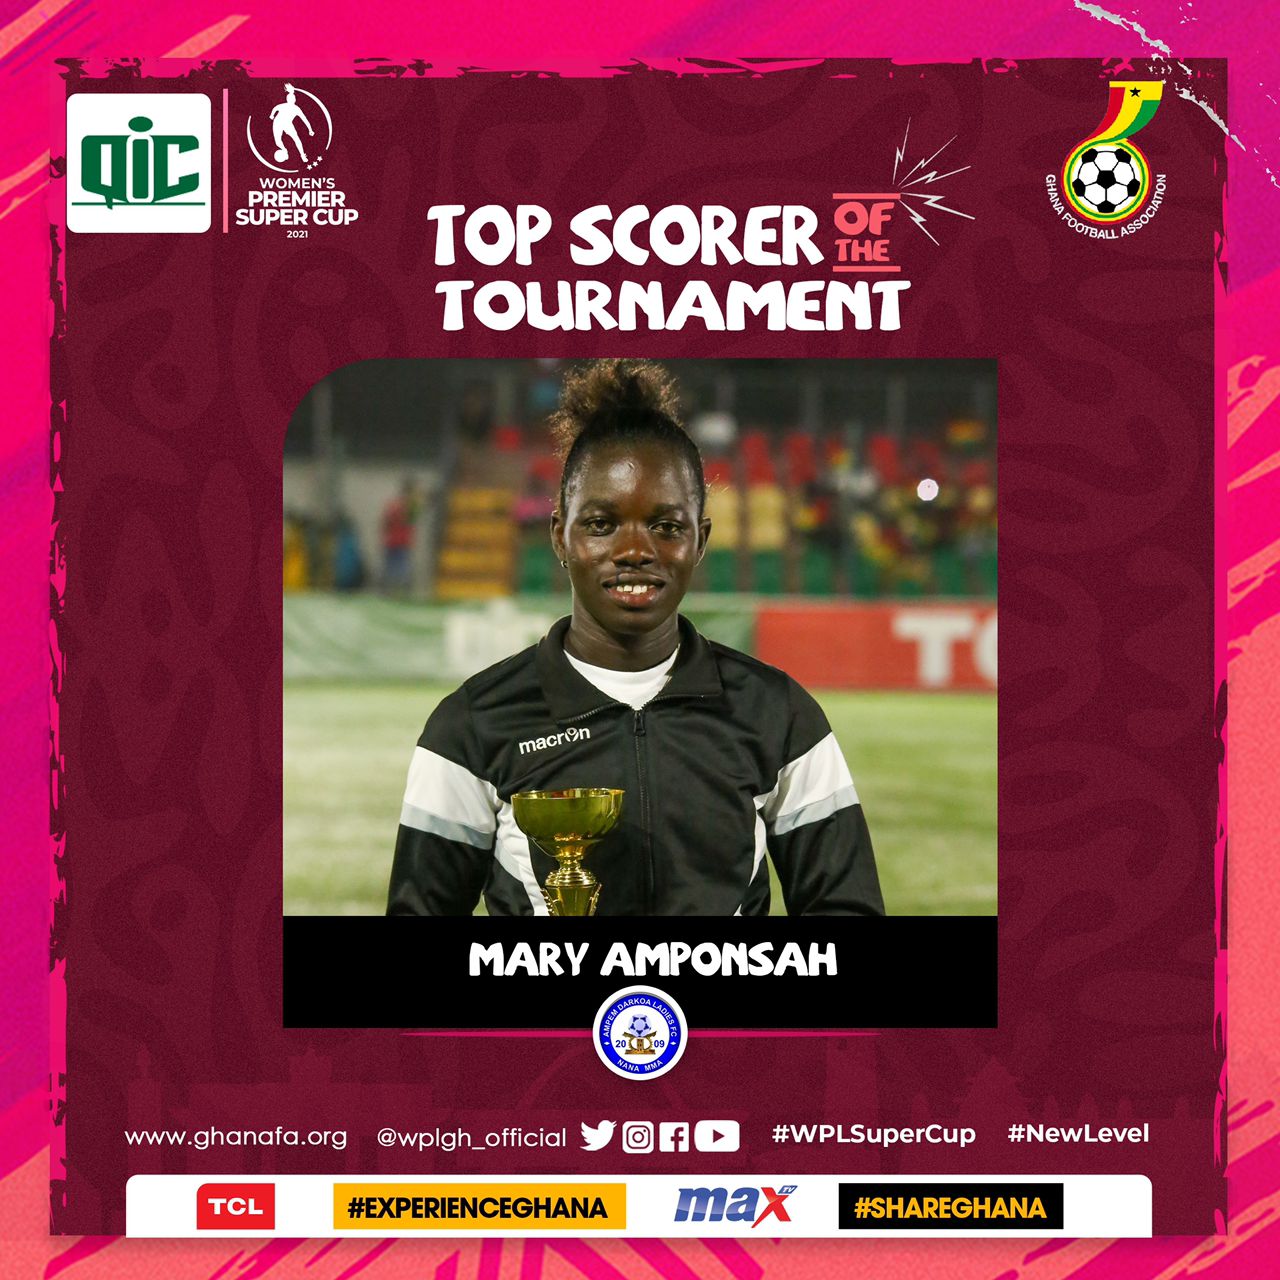 Mary Amponsah, Amfobea, others win big as Women’s Premier Super Cup end in style